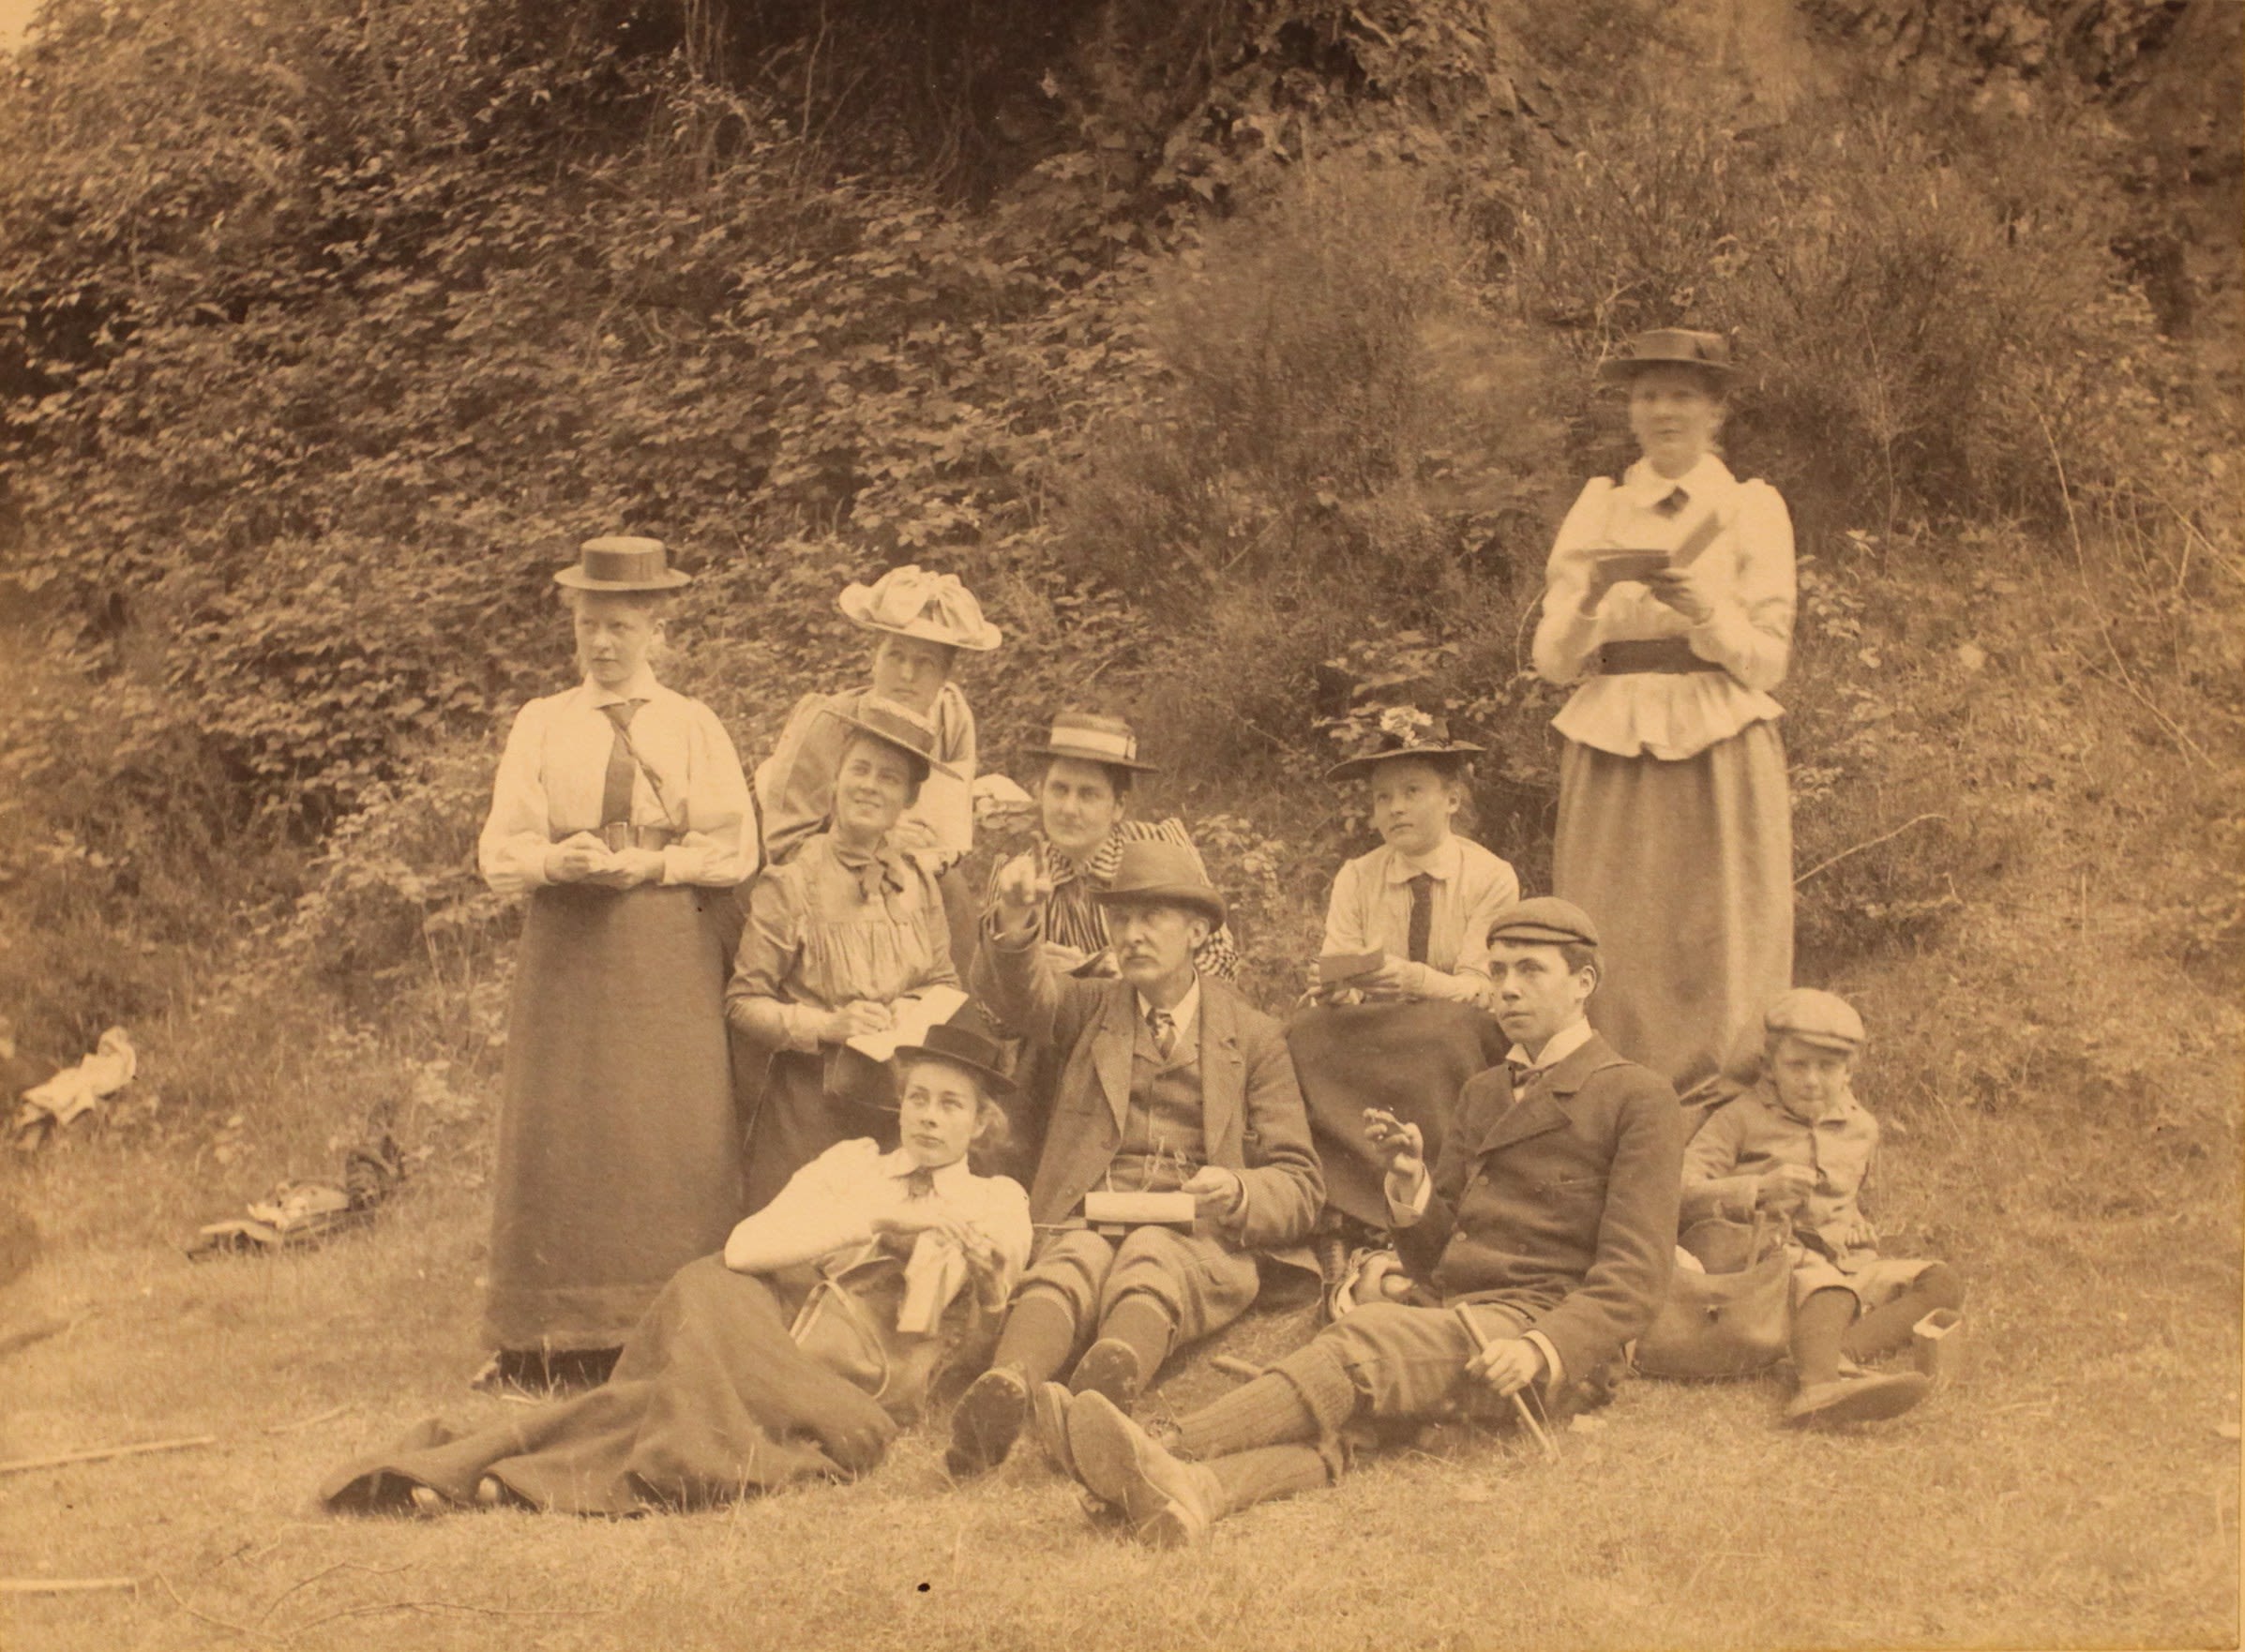 Photograph of students making notes and drawing on excursion. There are 7 women and 2 men, plus a small child in the photograph.